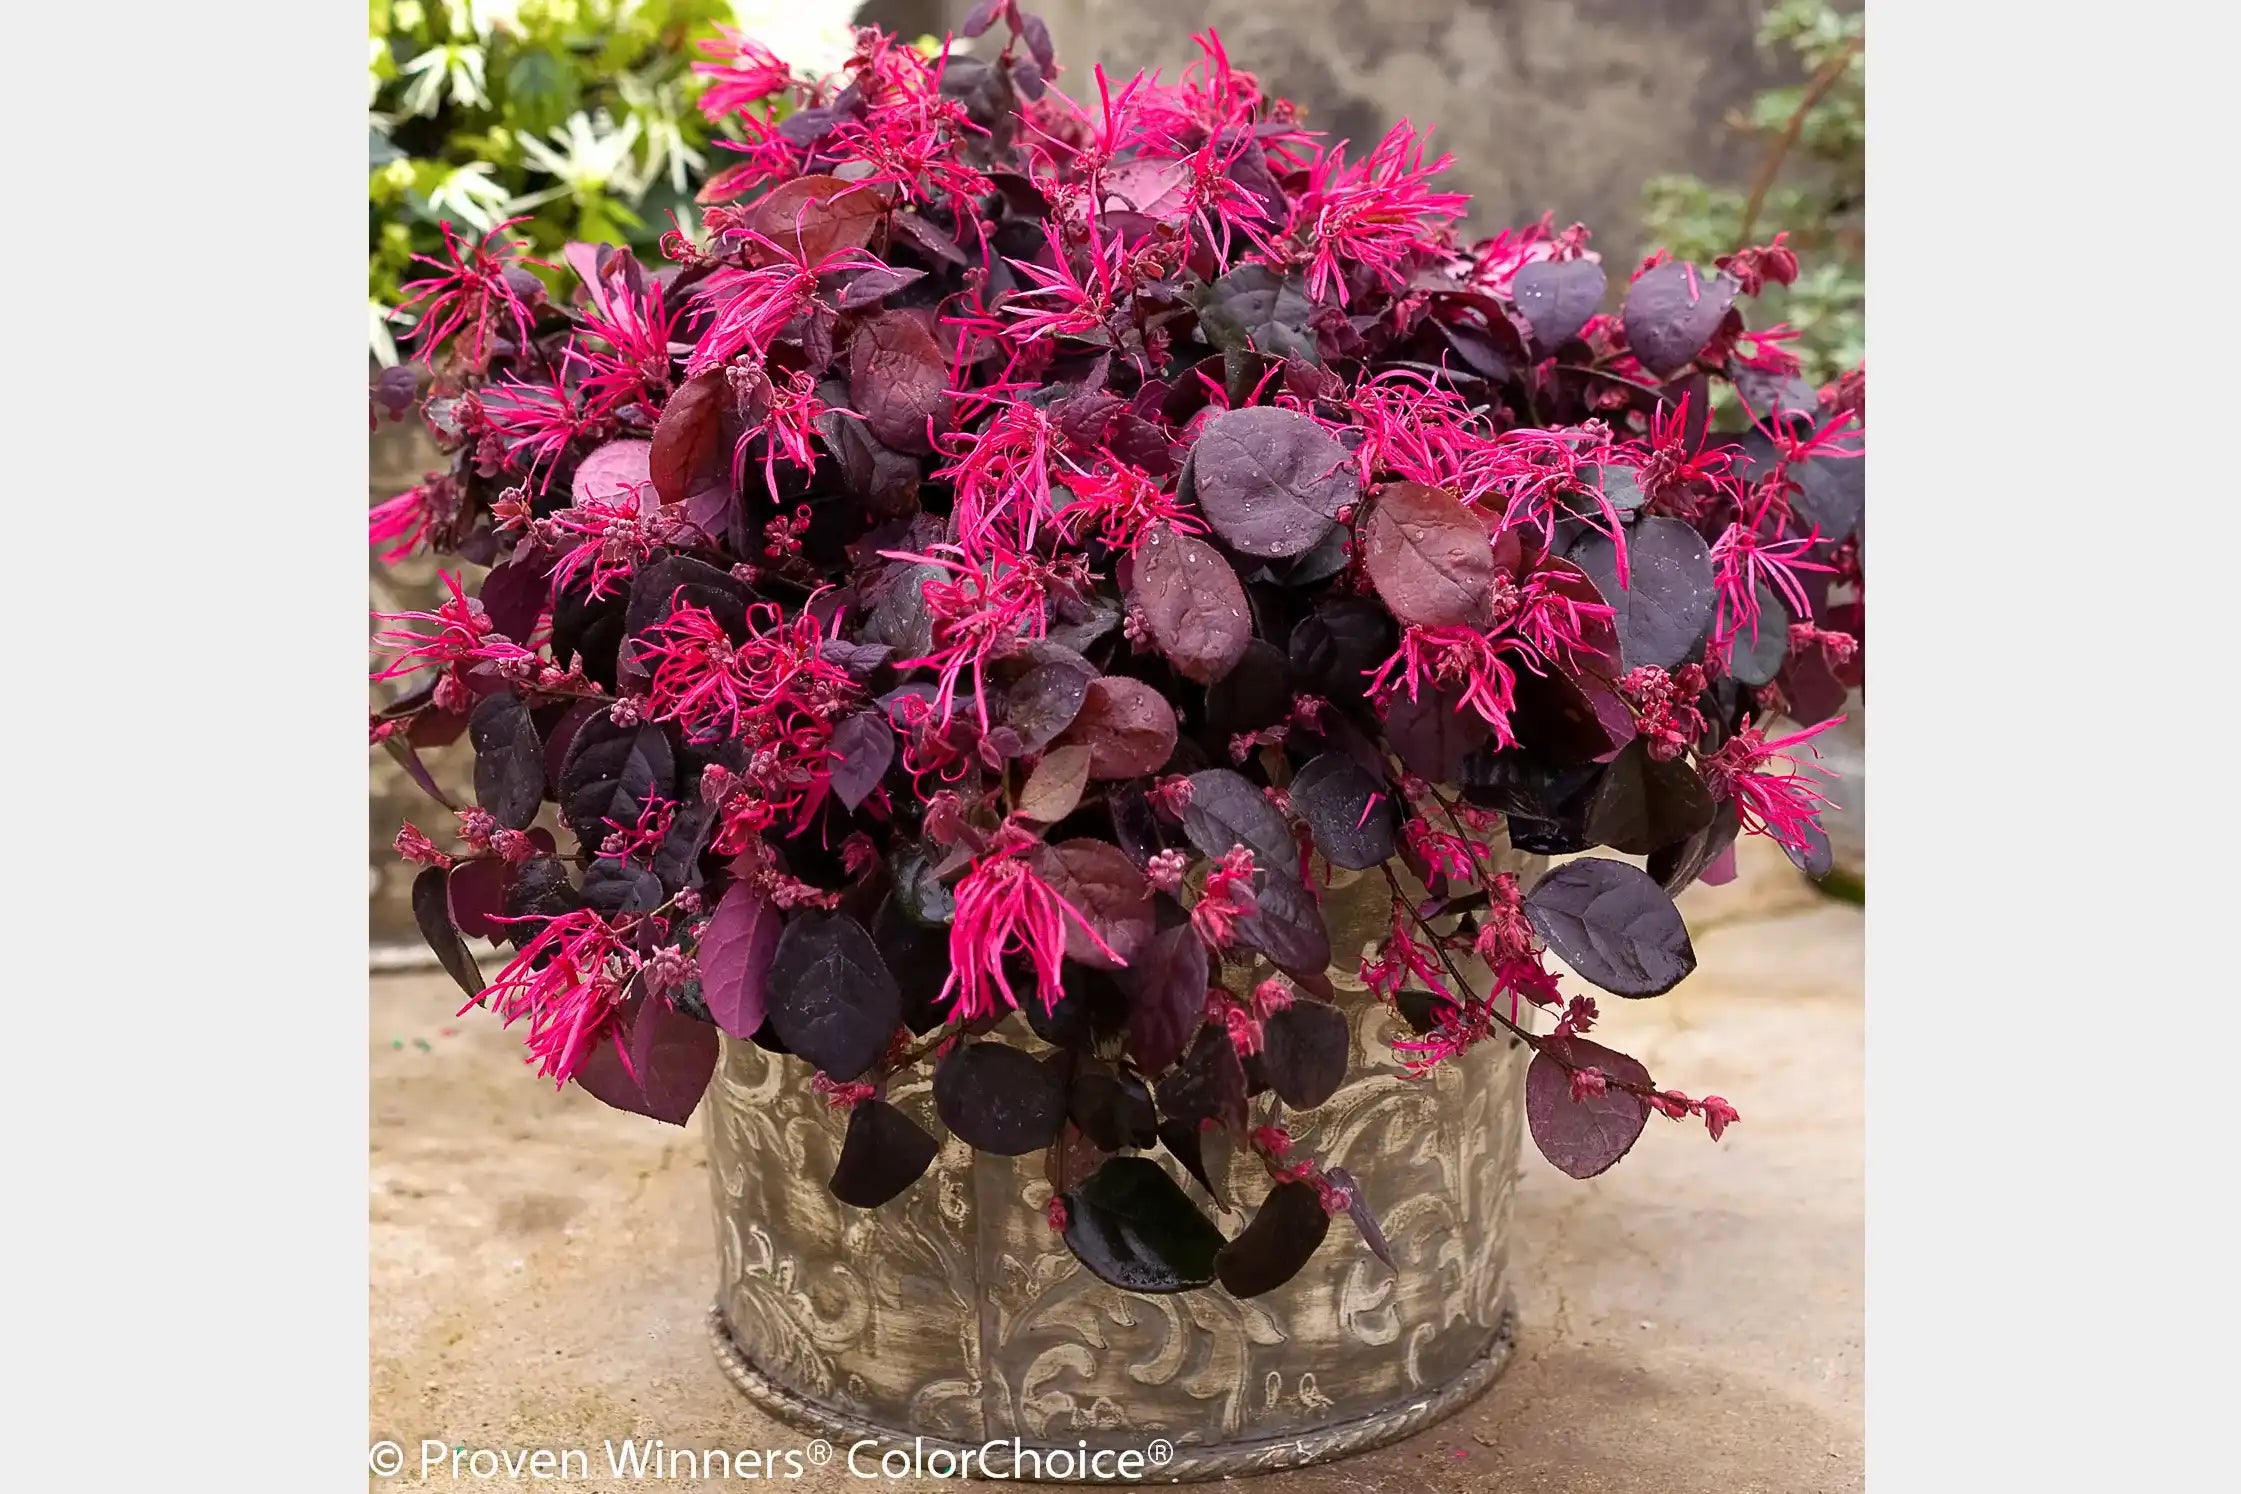 Jazz Hands Bold® Loropetalum shown off its fringe flowers that almost resemble fireworks above a landacape of dark burgundy leaves. All this beauty fits in a decorative container for maximum enjoyment indoors as well as outdoors.